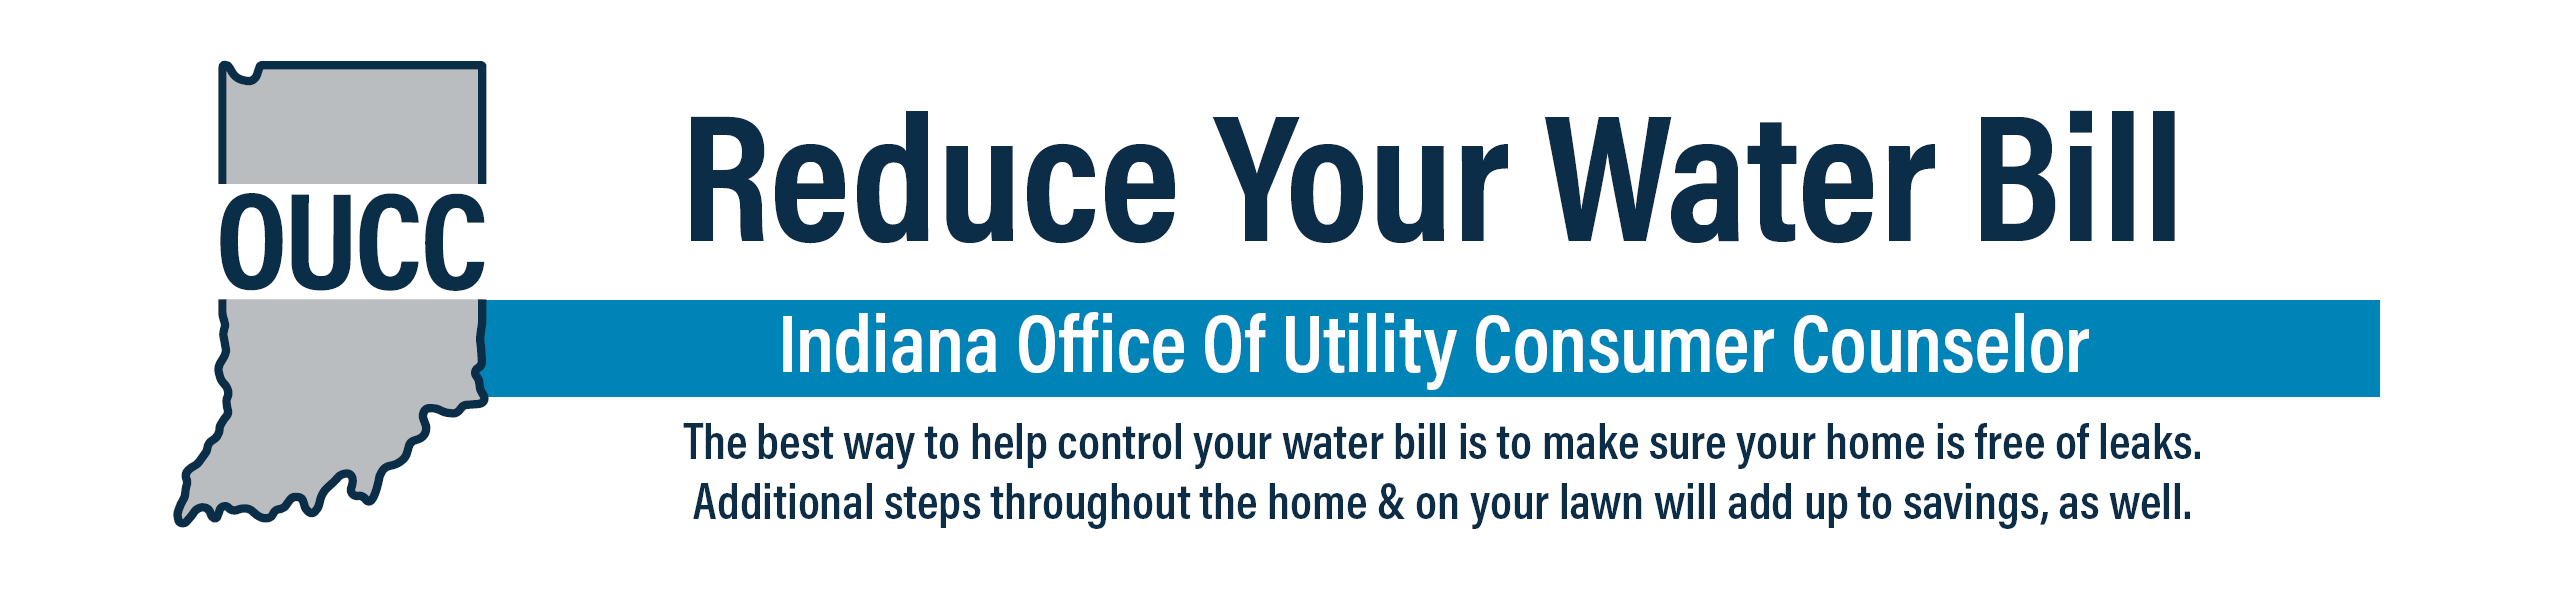 Reduce Your Water Bill